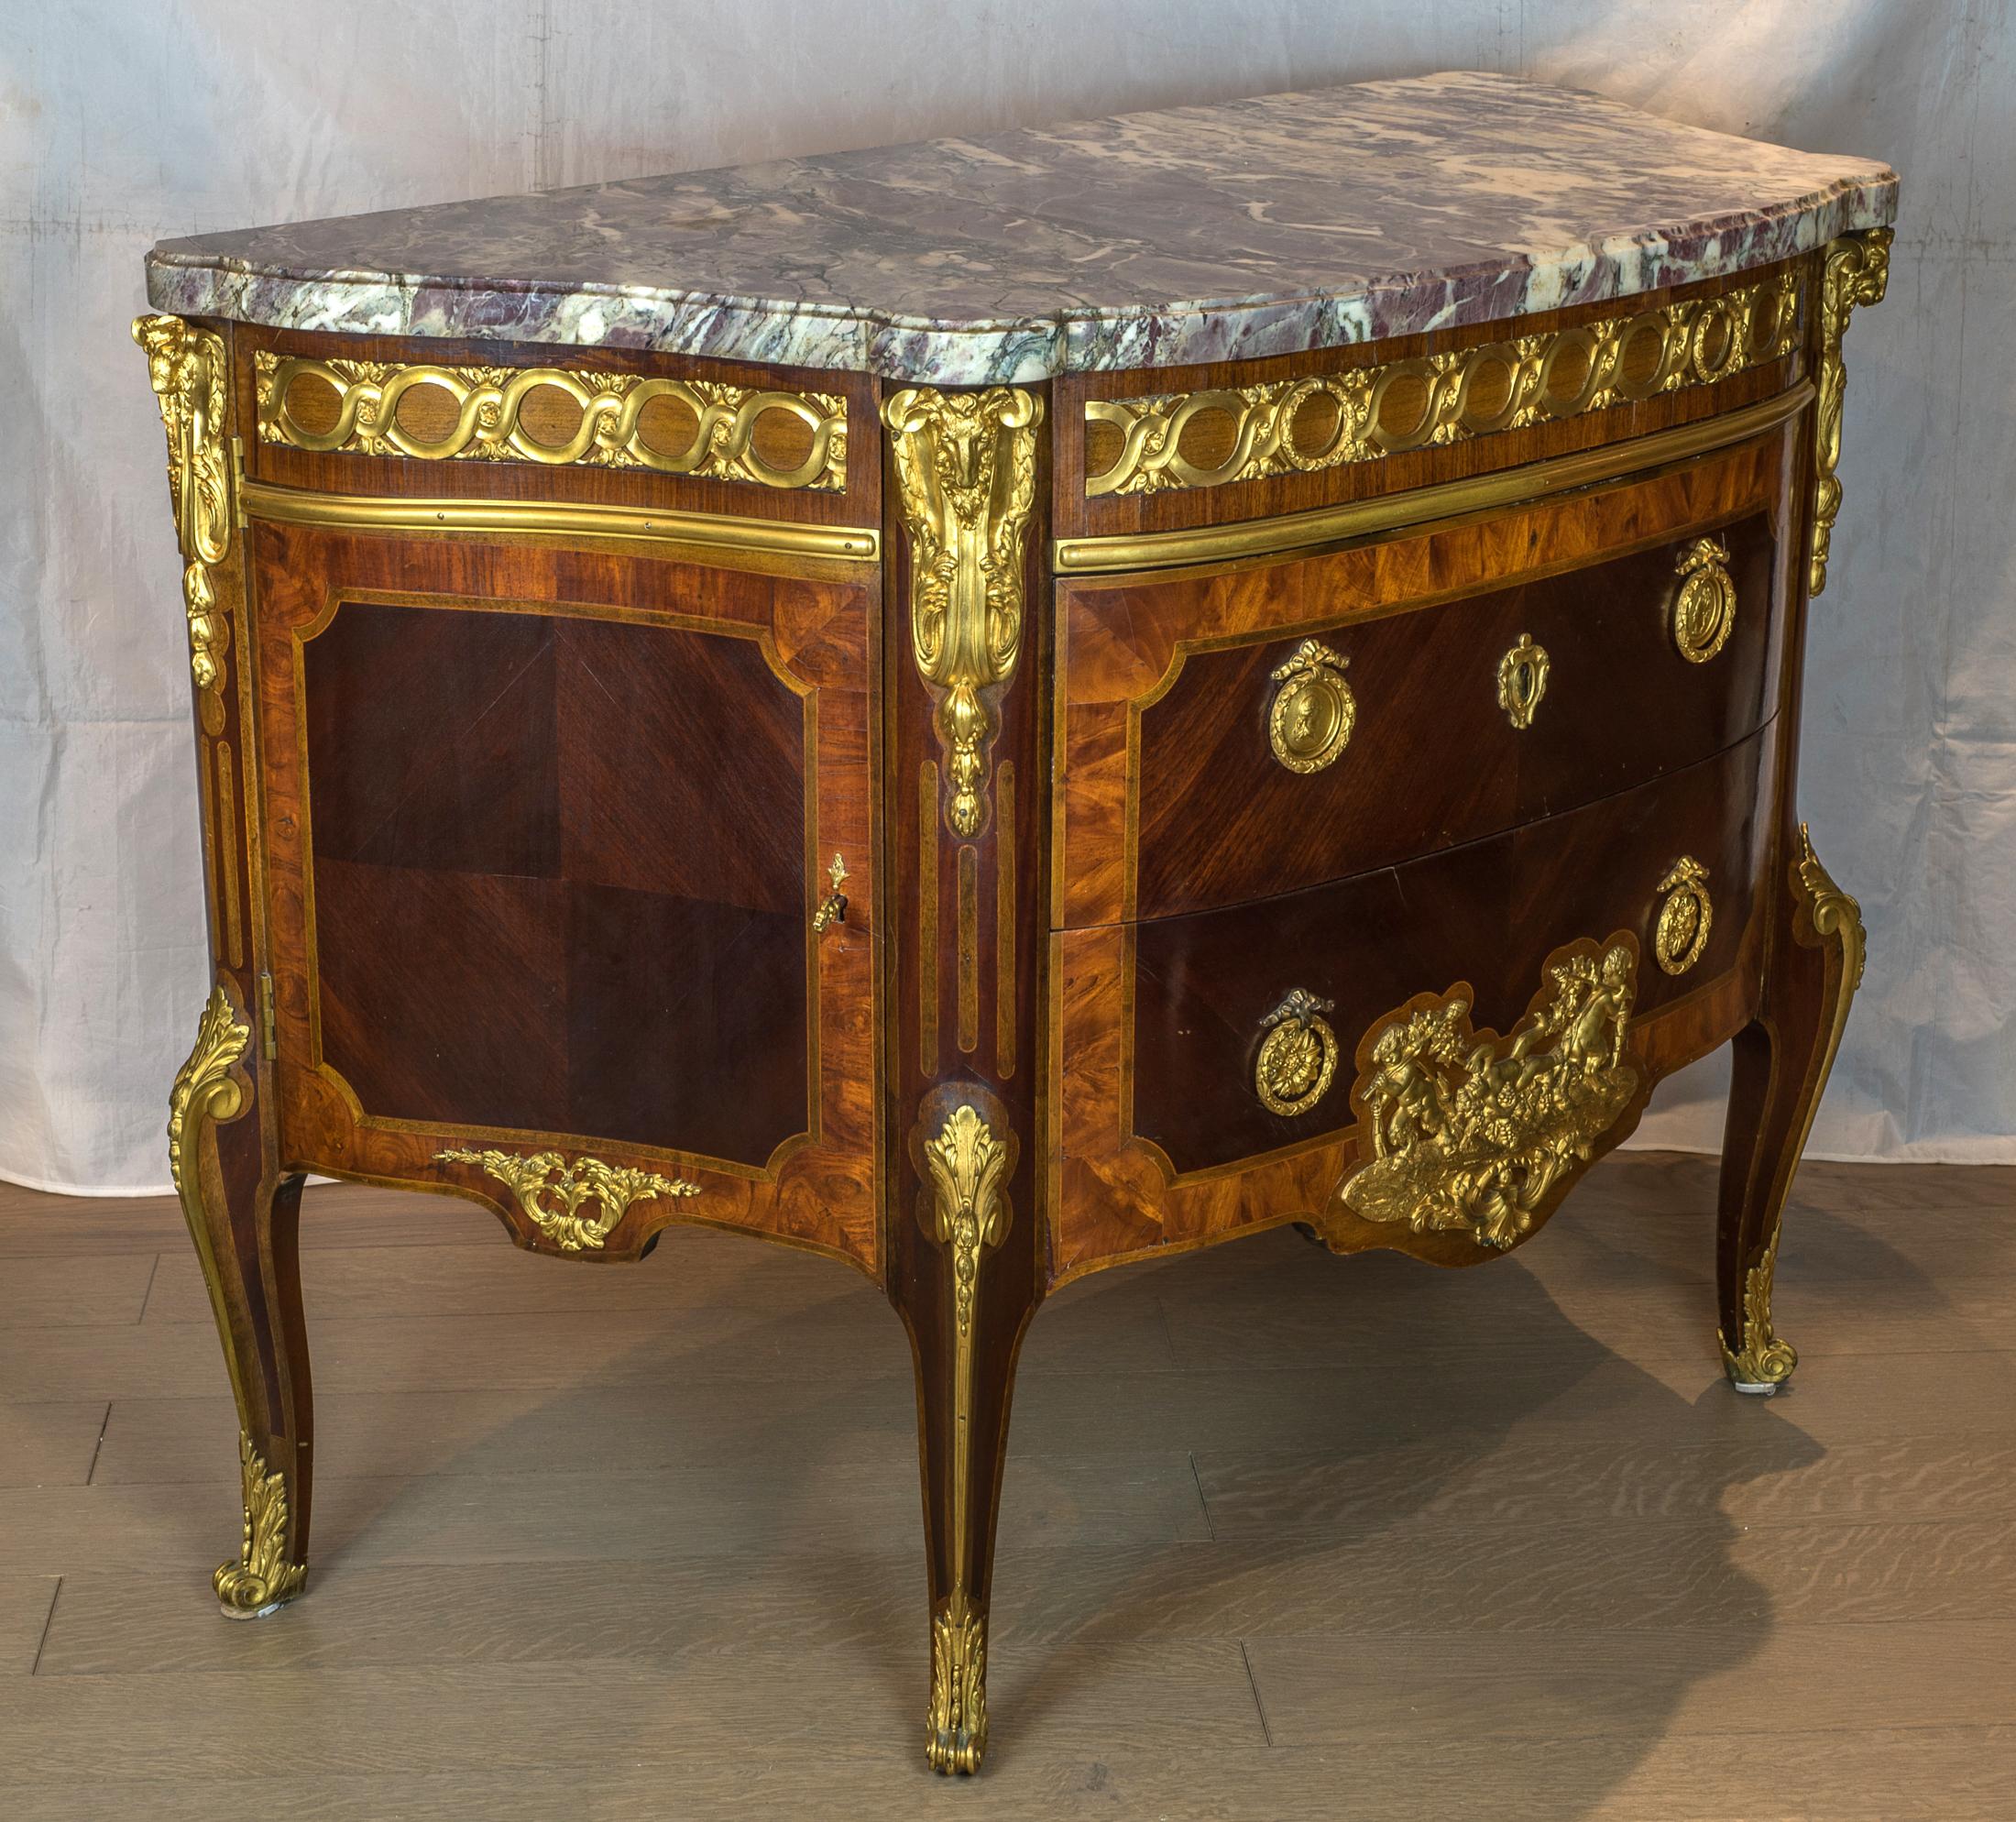 Pair of Gilt Bronze-Mounted Tulipwood and Amaranth Marble-Top Commode In Excellent Condition For Sale In New York, NY